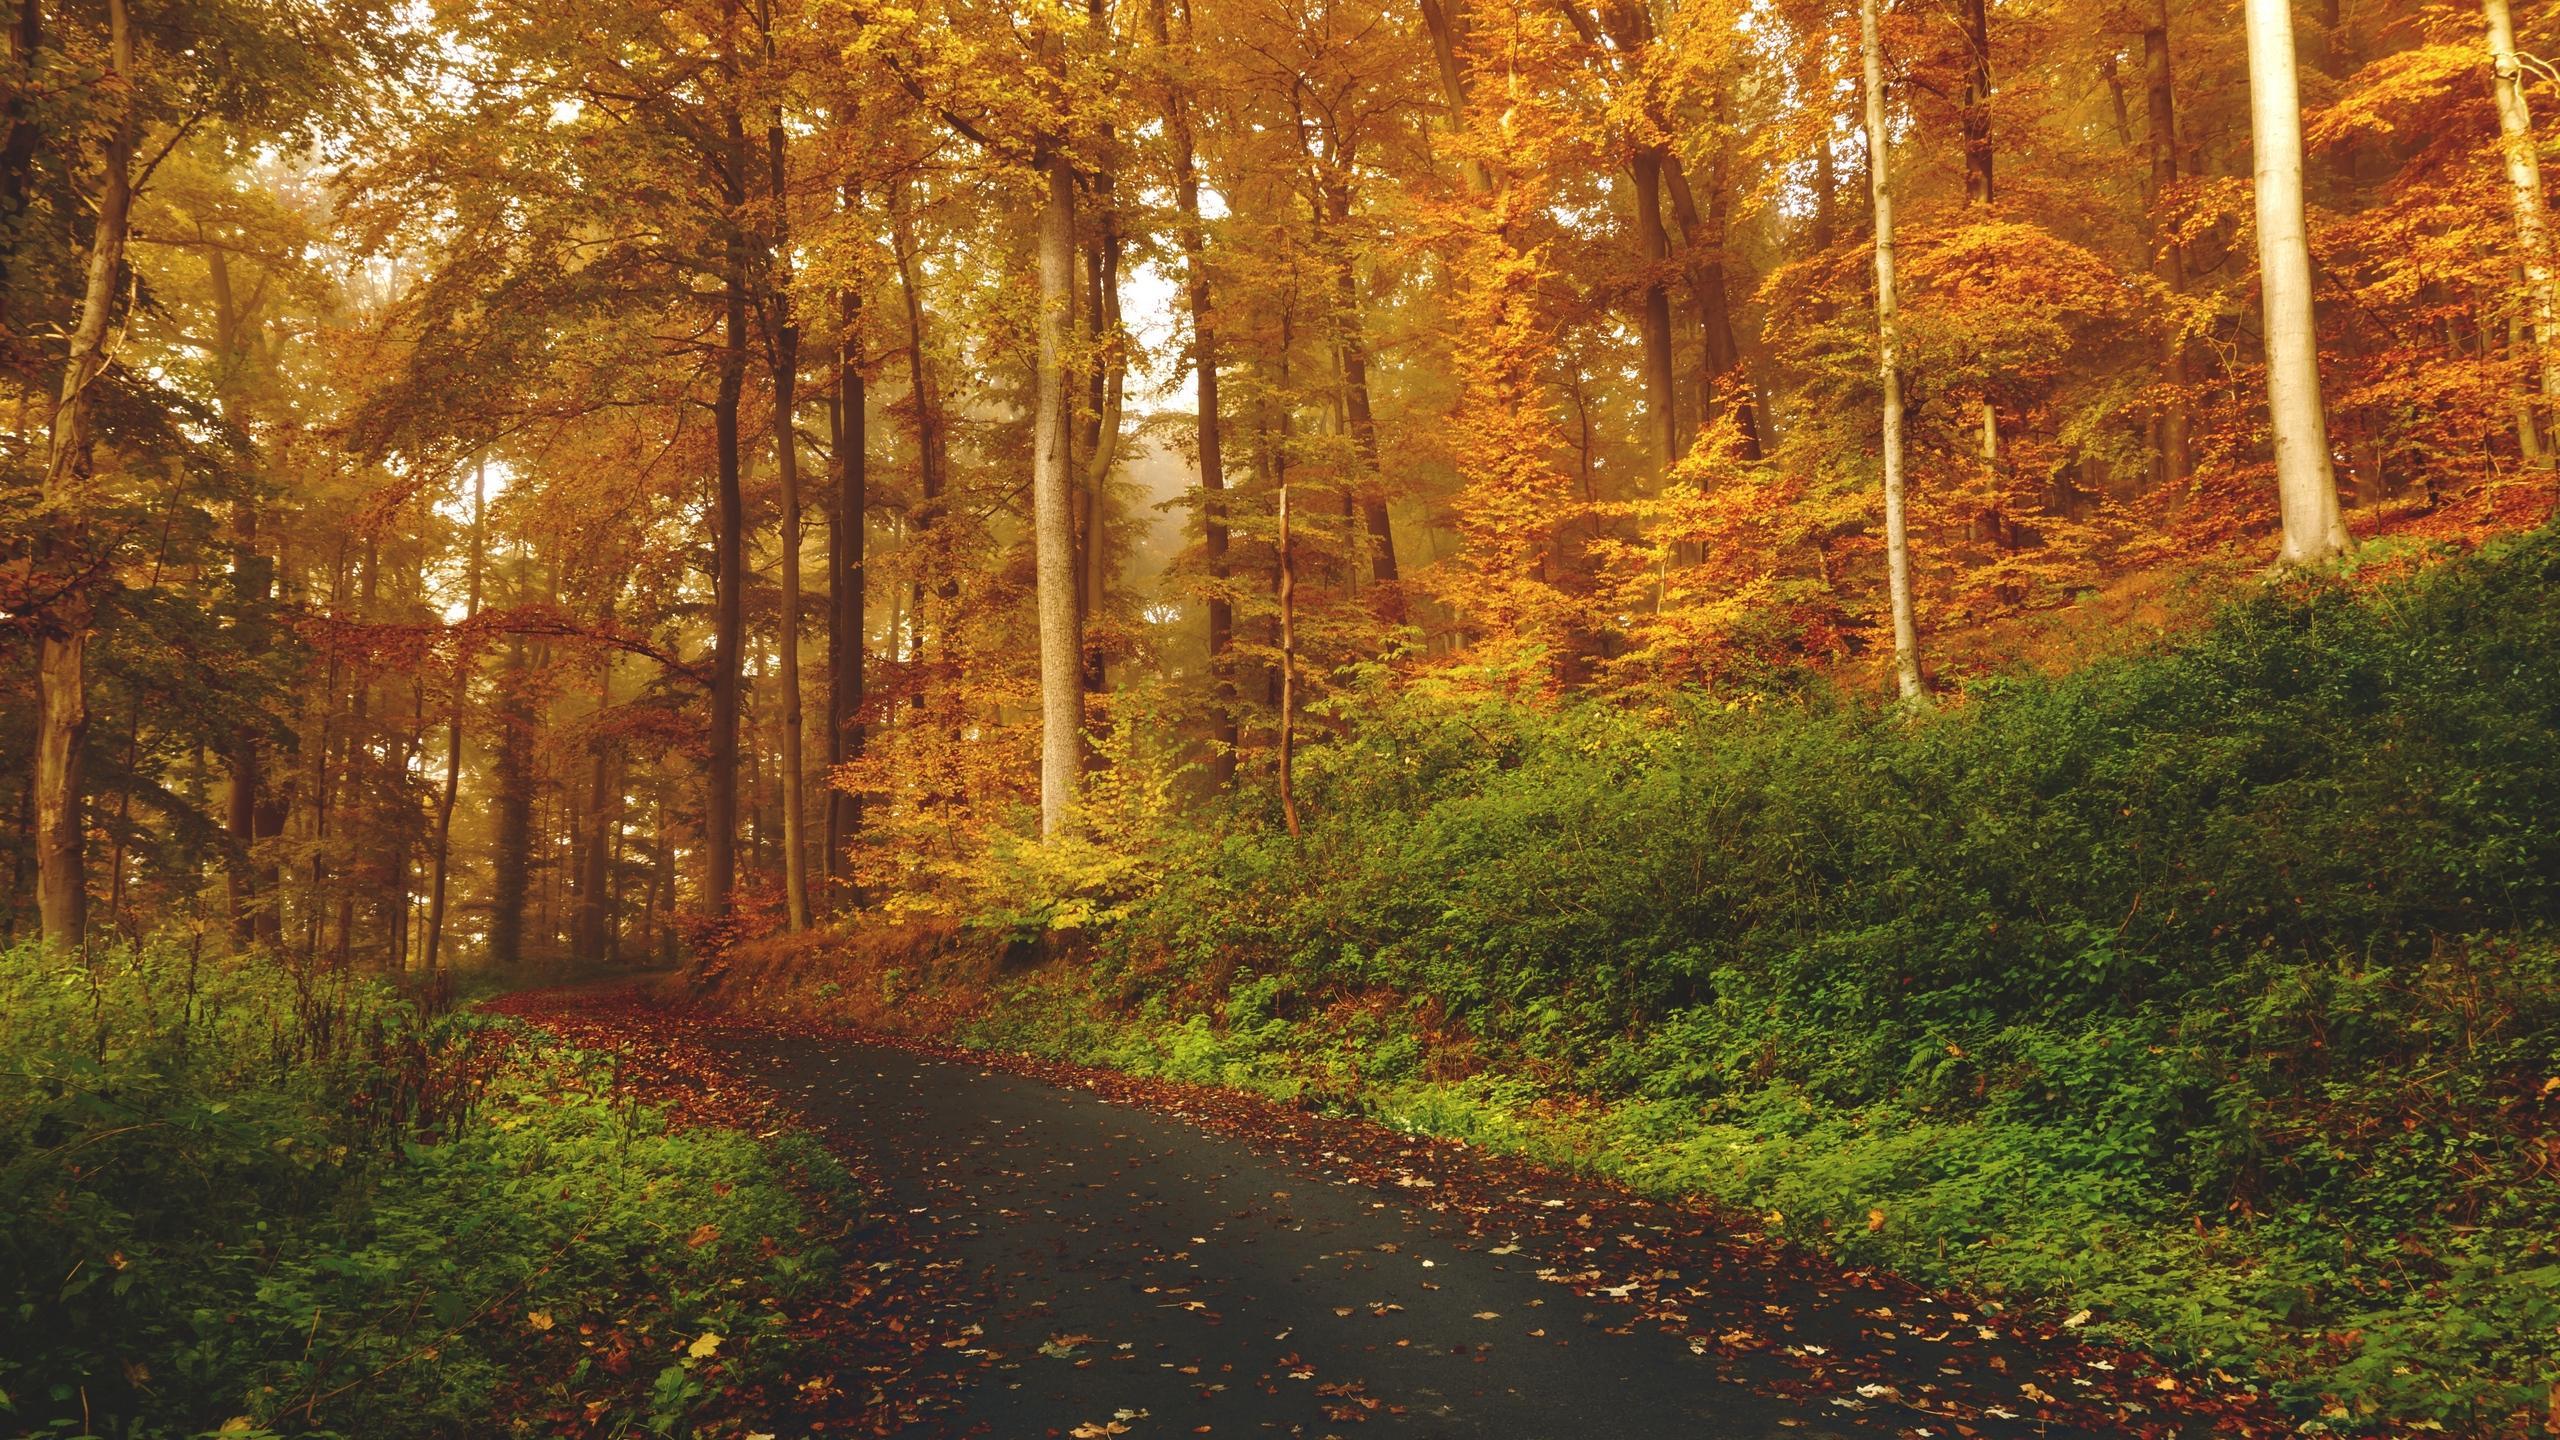 Download wallpaper 2560x1440 autumn, trees, forest, trail